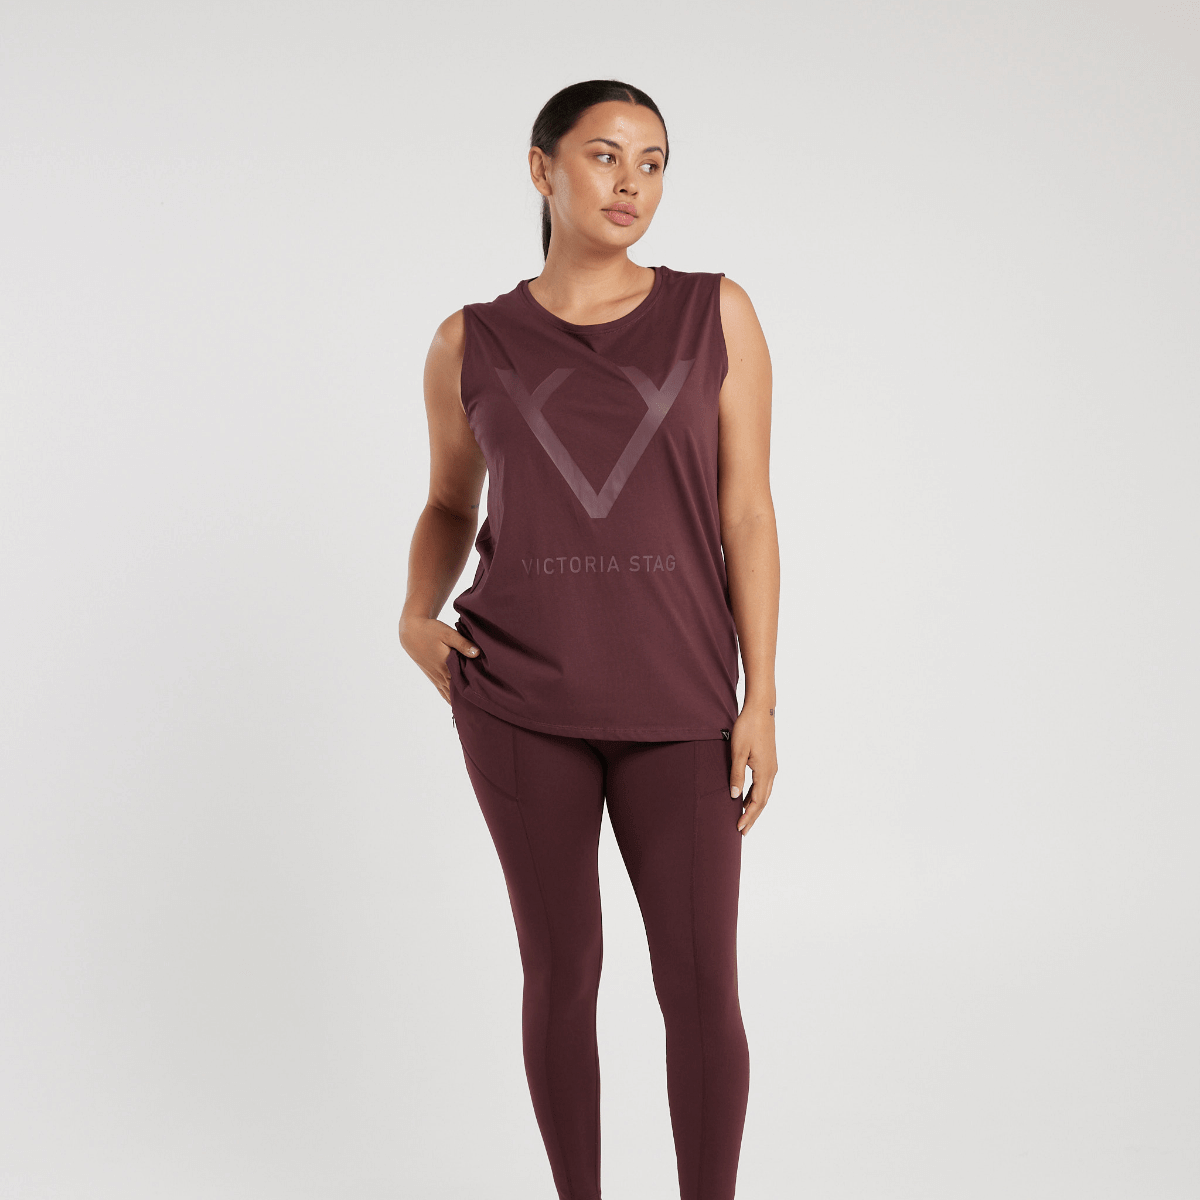 Woman wearing Victoria Stag's Core Muscle Tank in Ox Blood